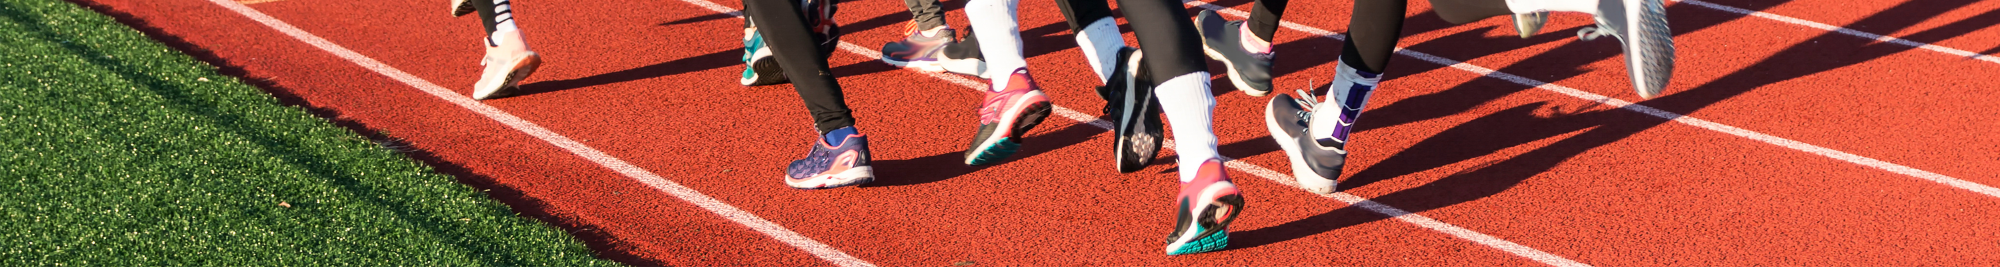 Photograph of a racetrack and running feet 